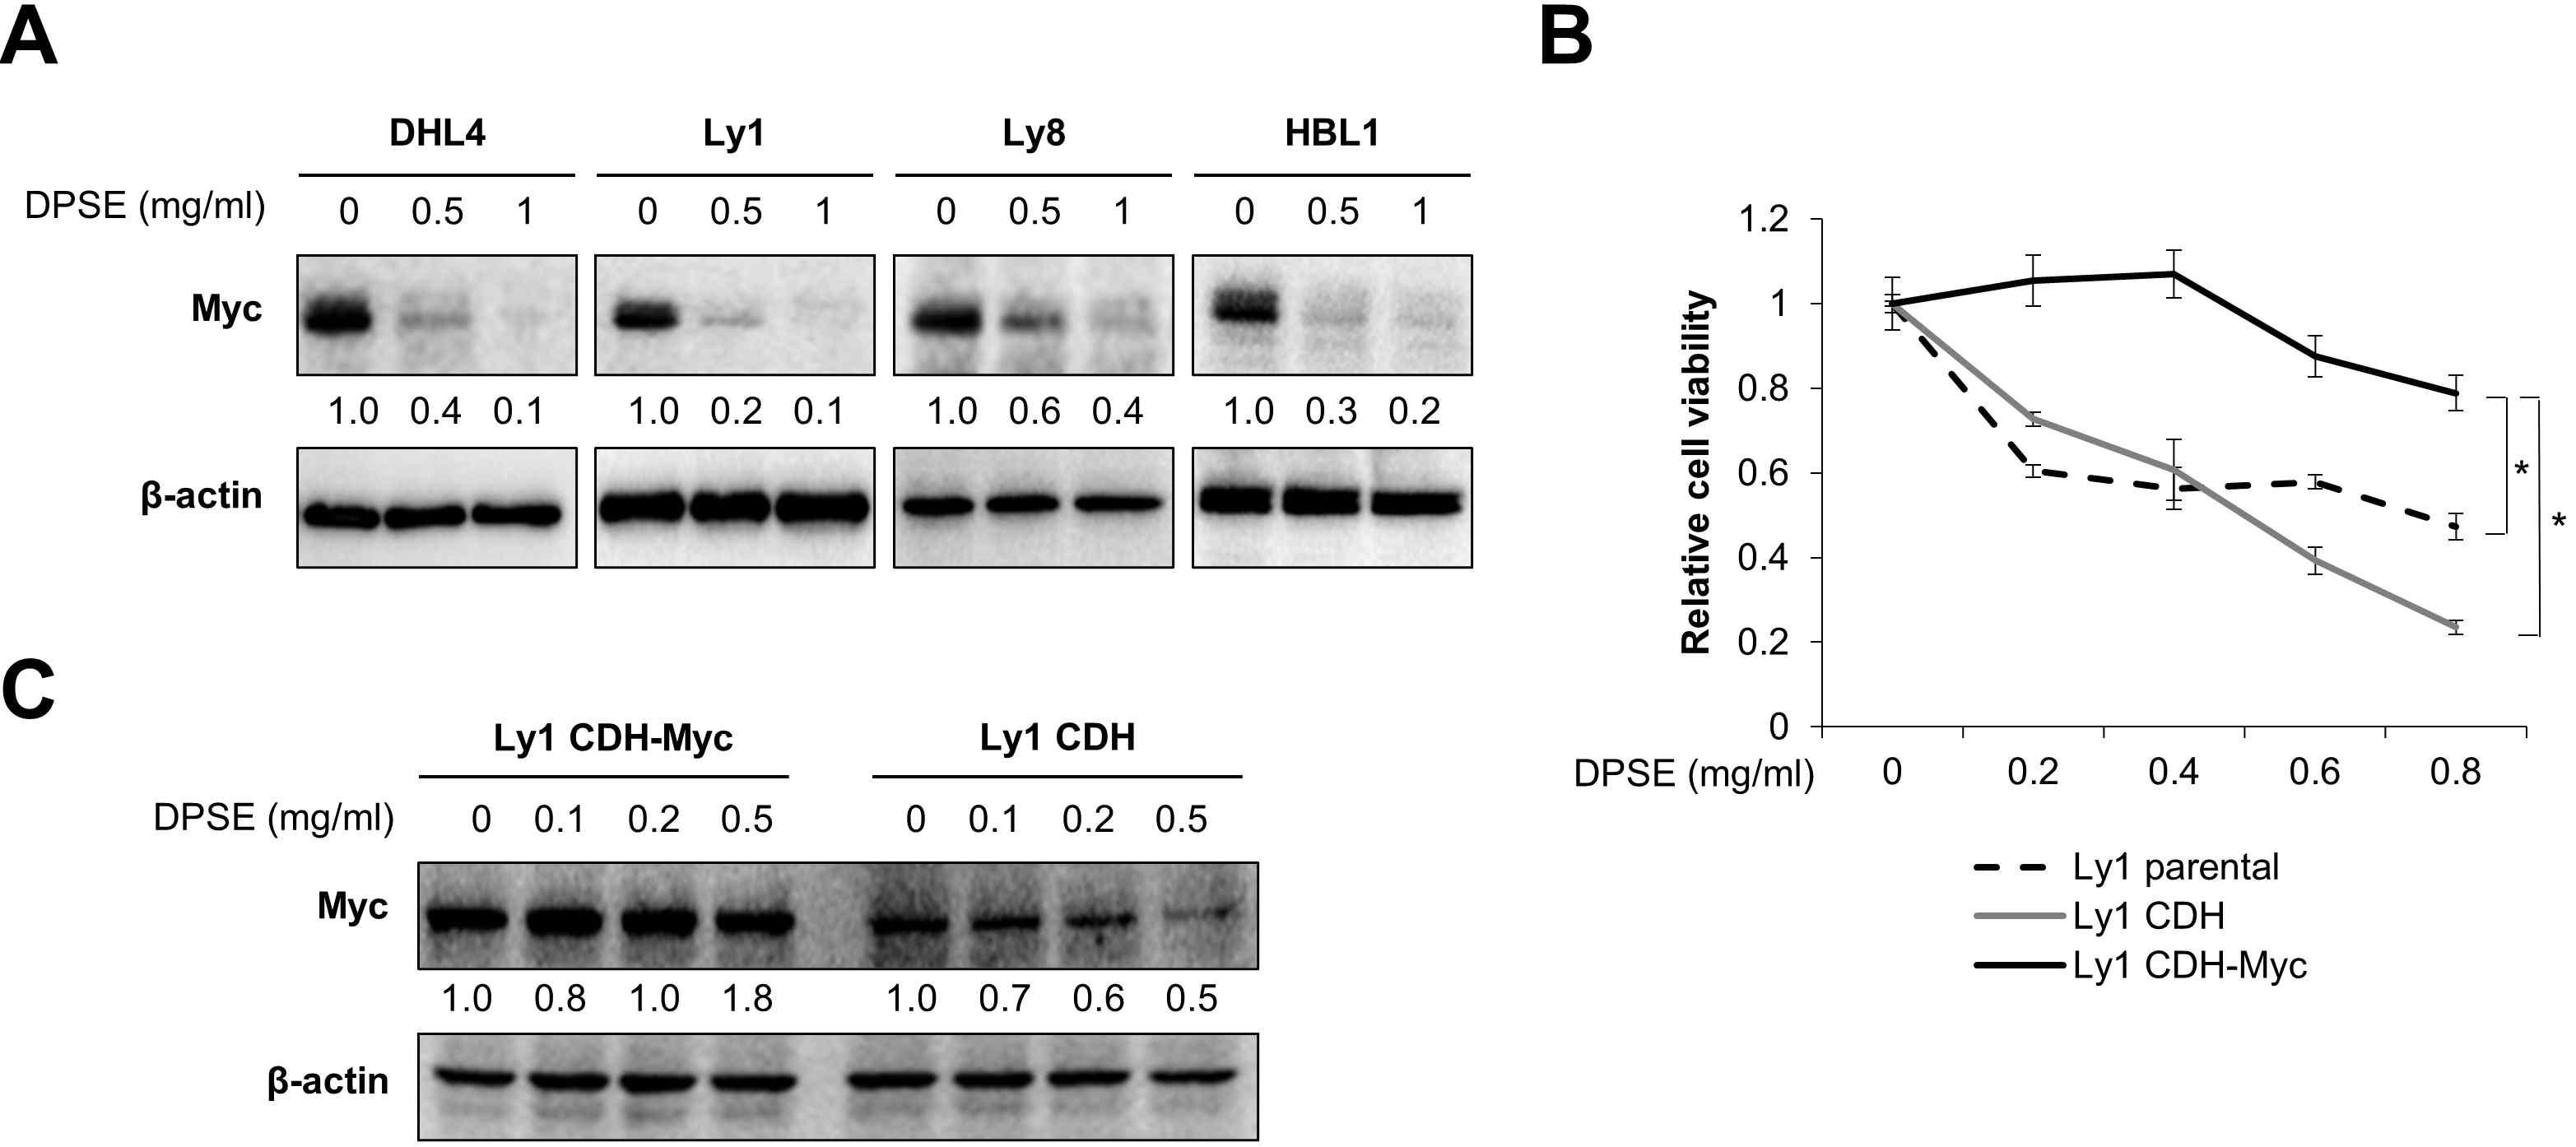 DPSE-induced cell death may be mediated through Myc. (A) DHL4, Ly1, Ly8, and HBL1 cells were exposed to DPSE (0, 0.5, and 1 mg/ml) for 24 h and protein expression levels of Myc were analyzed by western blotting. (B) Ly1 parental, CDH-control, or CDH-Myc cells were treated with DPSE (0, 0.2, 0.4, 0.6, and 0.8 mg/ml for 24 h), and cell viability was measured by MTS assays. A two-tailed one-way ANOVA test was used to calculate statistical significance (*p < 0.05). (C) Ly1 CDH-control or CDH-Myc cells were exposed to DPSE (0, 0.1, 0.2, and 0.5 mg/ml) for 12 h, and protein levels of Myc were examined by western blotting. Band intensity in Ly1 CDH cells without DPSE treatment is set at 1, and intensities of all other bands including those in Ly1 CDH-Myc cells are normalized to that in Ly1 CDH cells without DPSE treatment